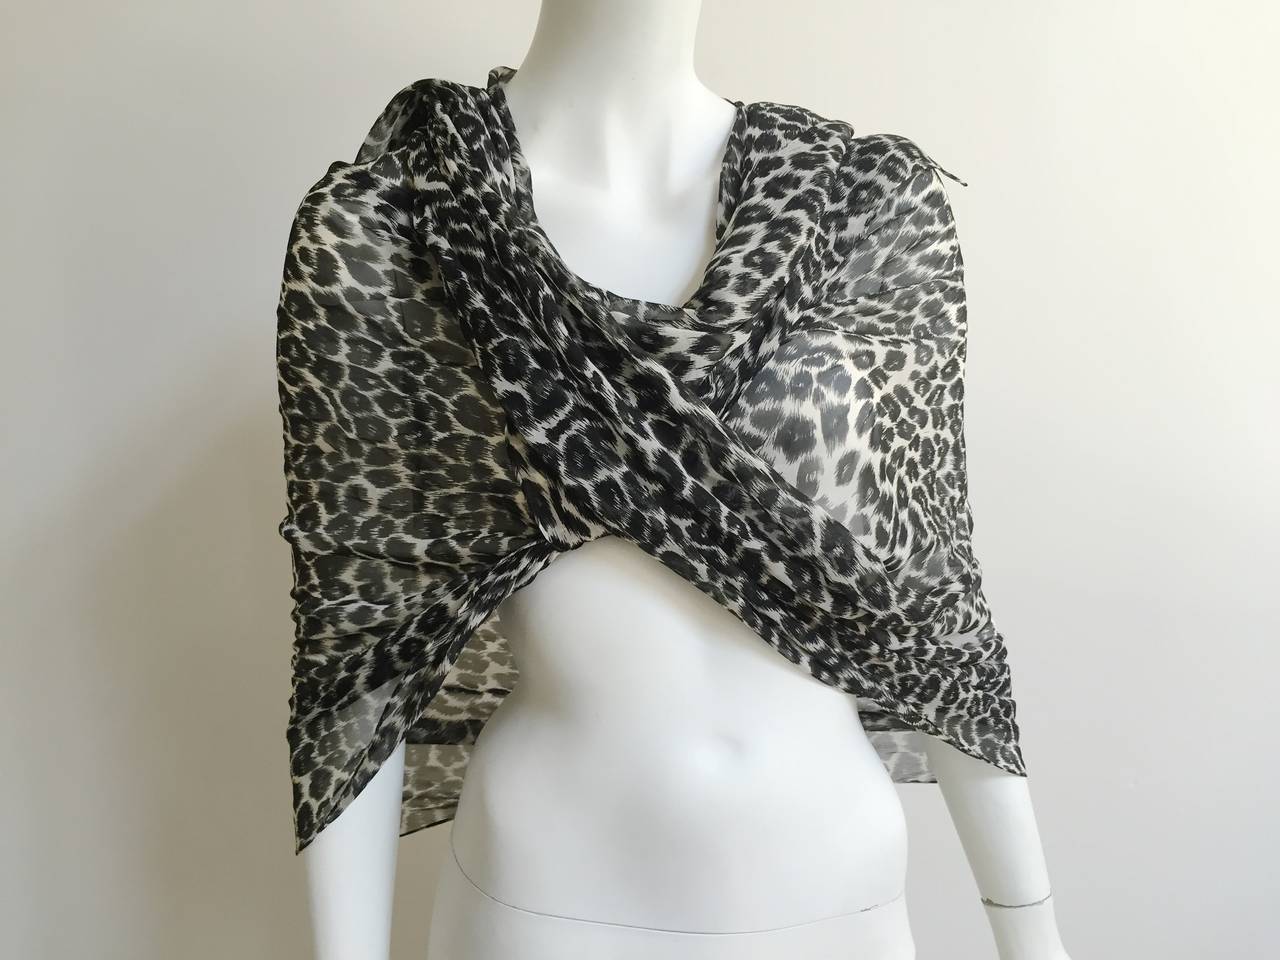 Yves Saint Laurent long silk cheetah print scarf. This was purchased at Neiman Marcus in Atlanta. 
Measurements are:
92